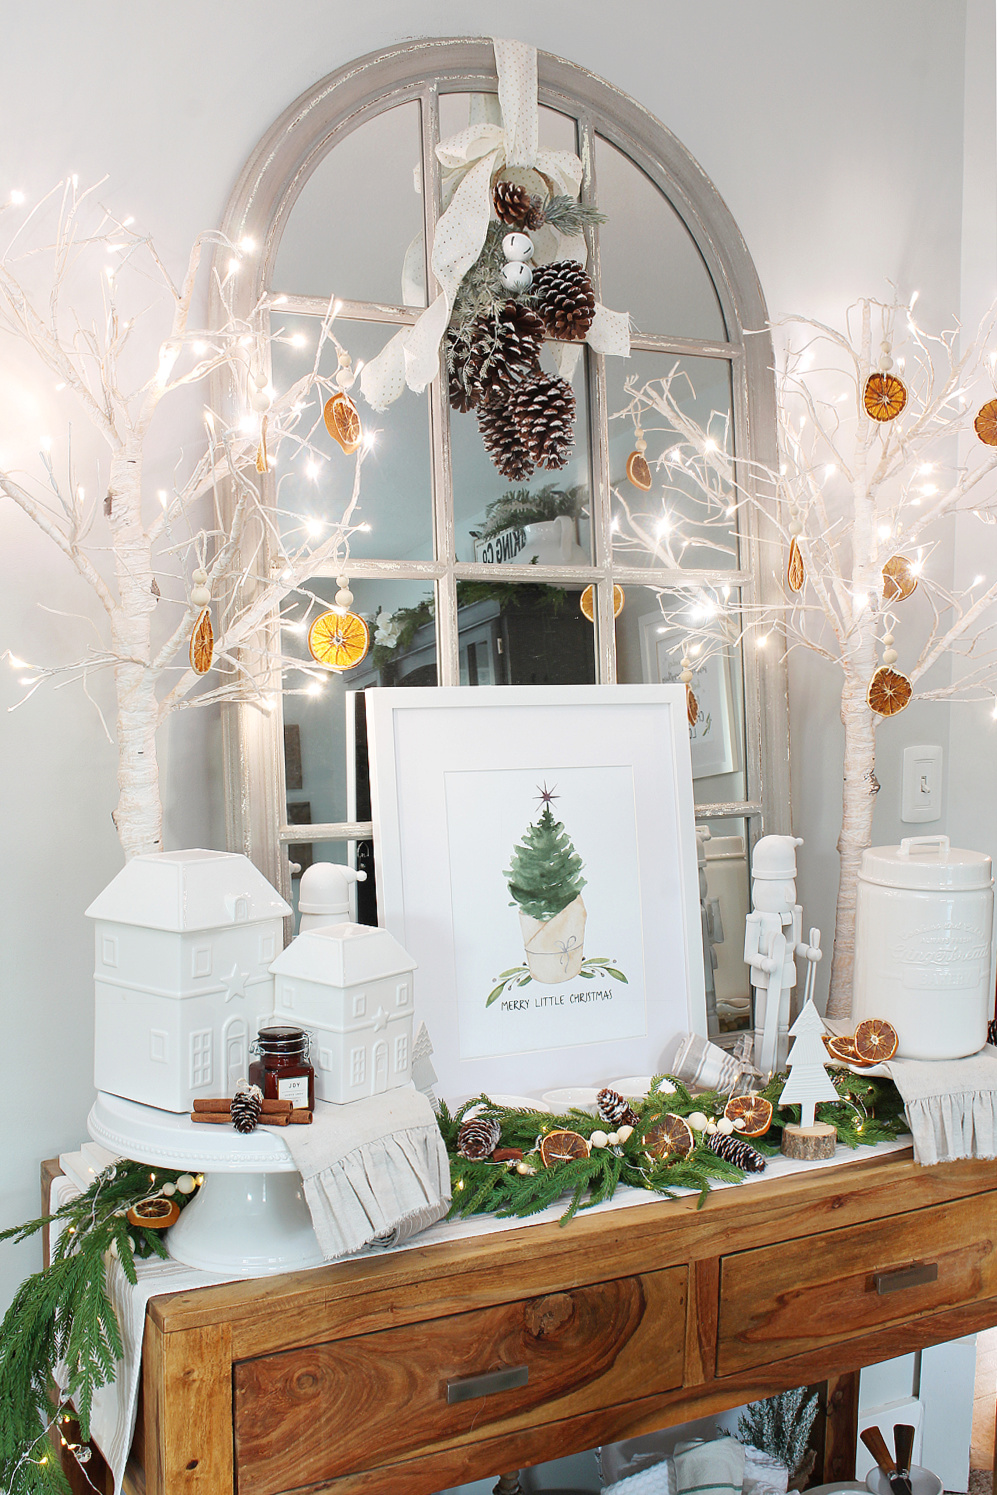 Sideboard decorated with free Christmas printable, greenery, and dried oranges.